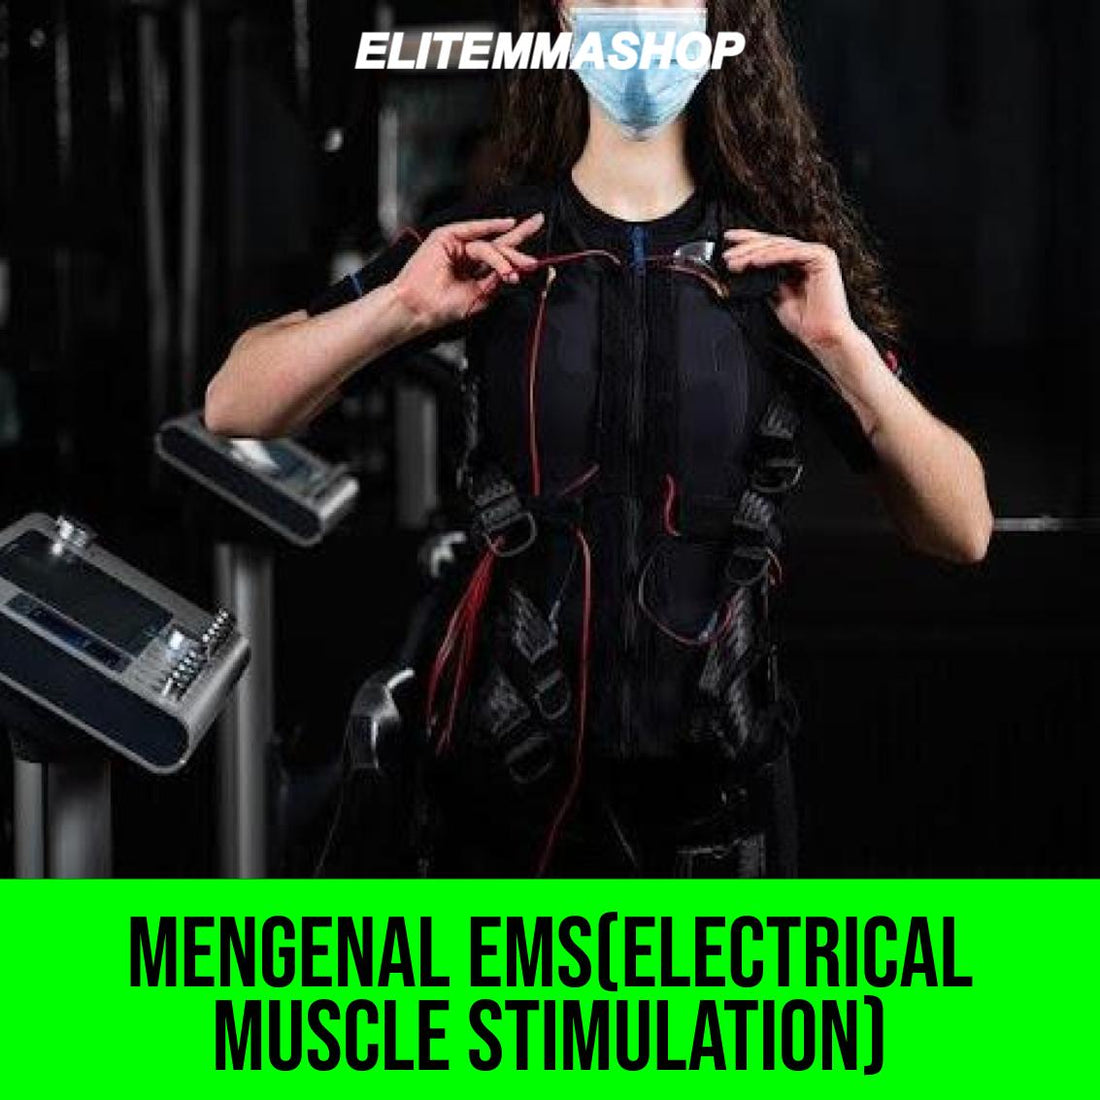 Mengenal EMS (Electrical Muscle Stimulation)